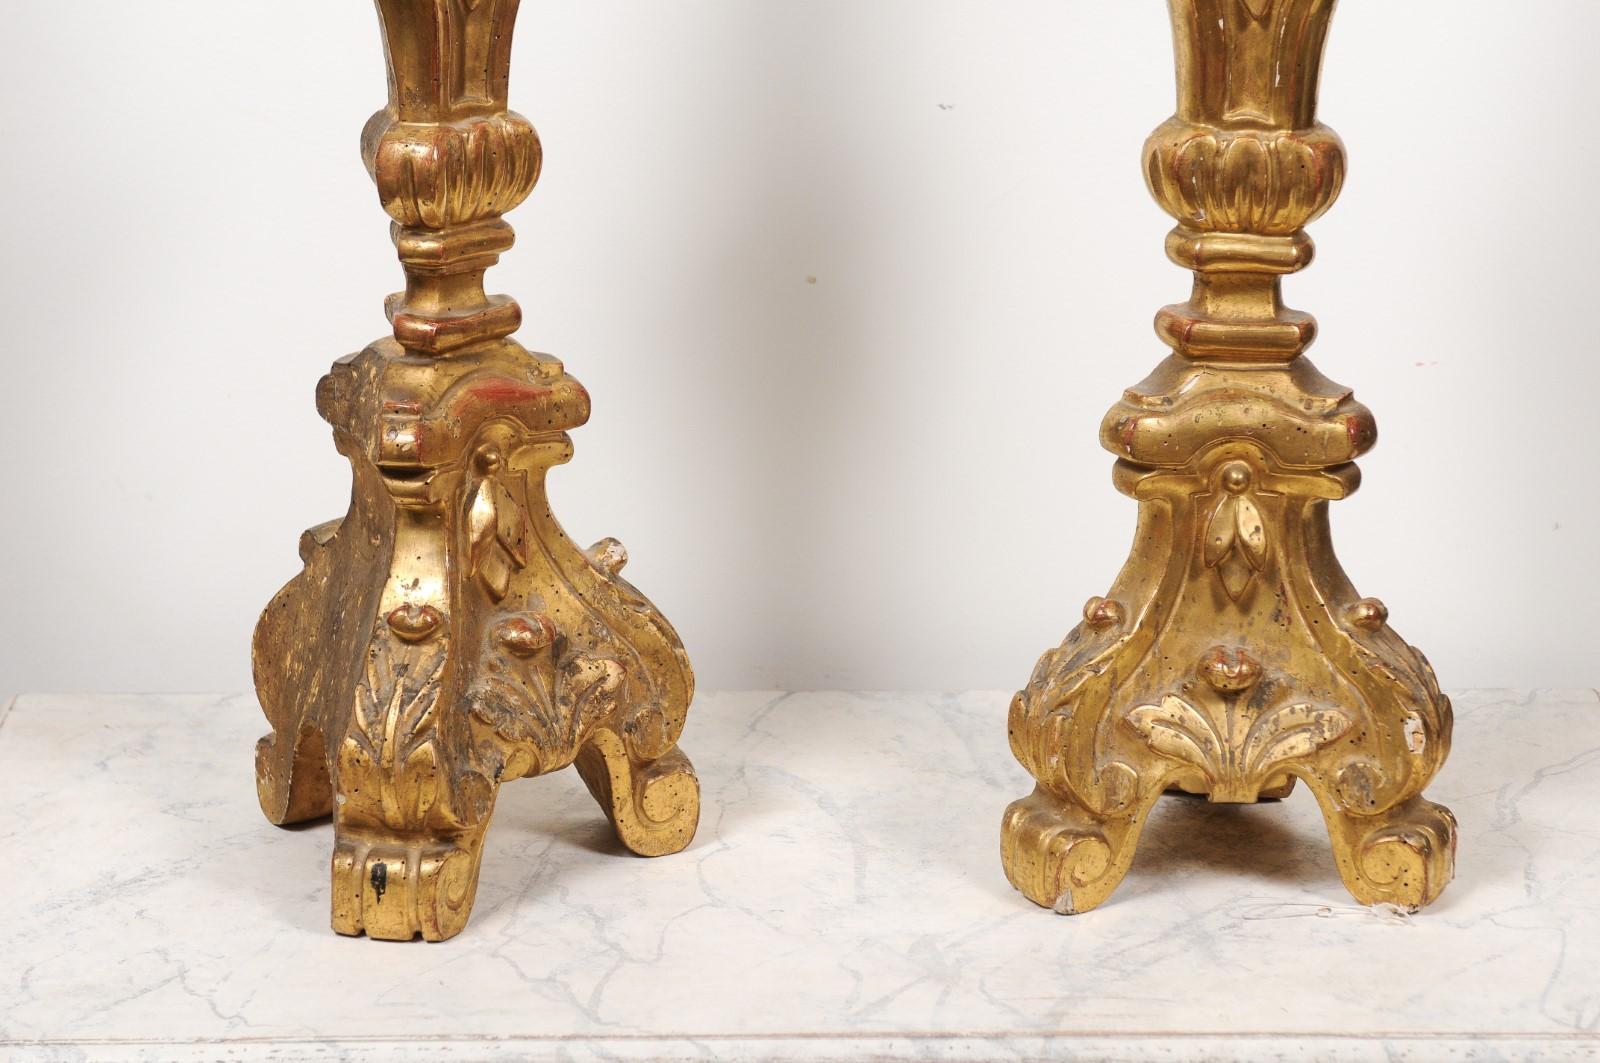 Pair of French 19th Century Gilt Candlesticks with Carved Foliage and Volutes For Sale 1